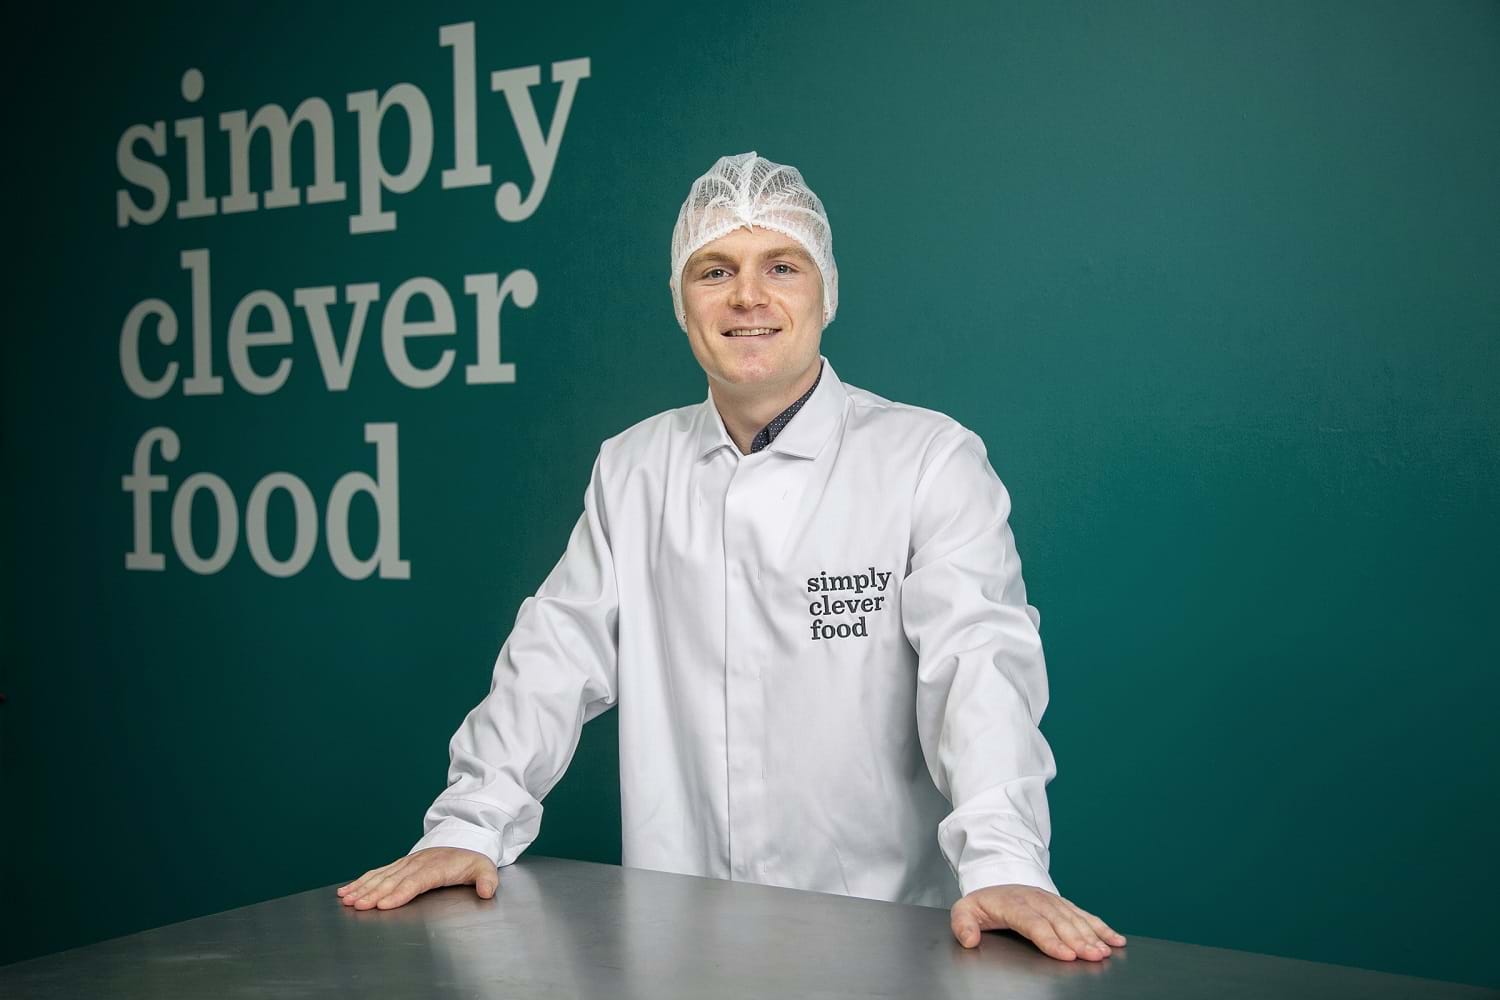 The image features Jamie in a lab coat and hairnet in front of a wall which has text reading "simply clever food".